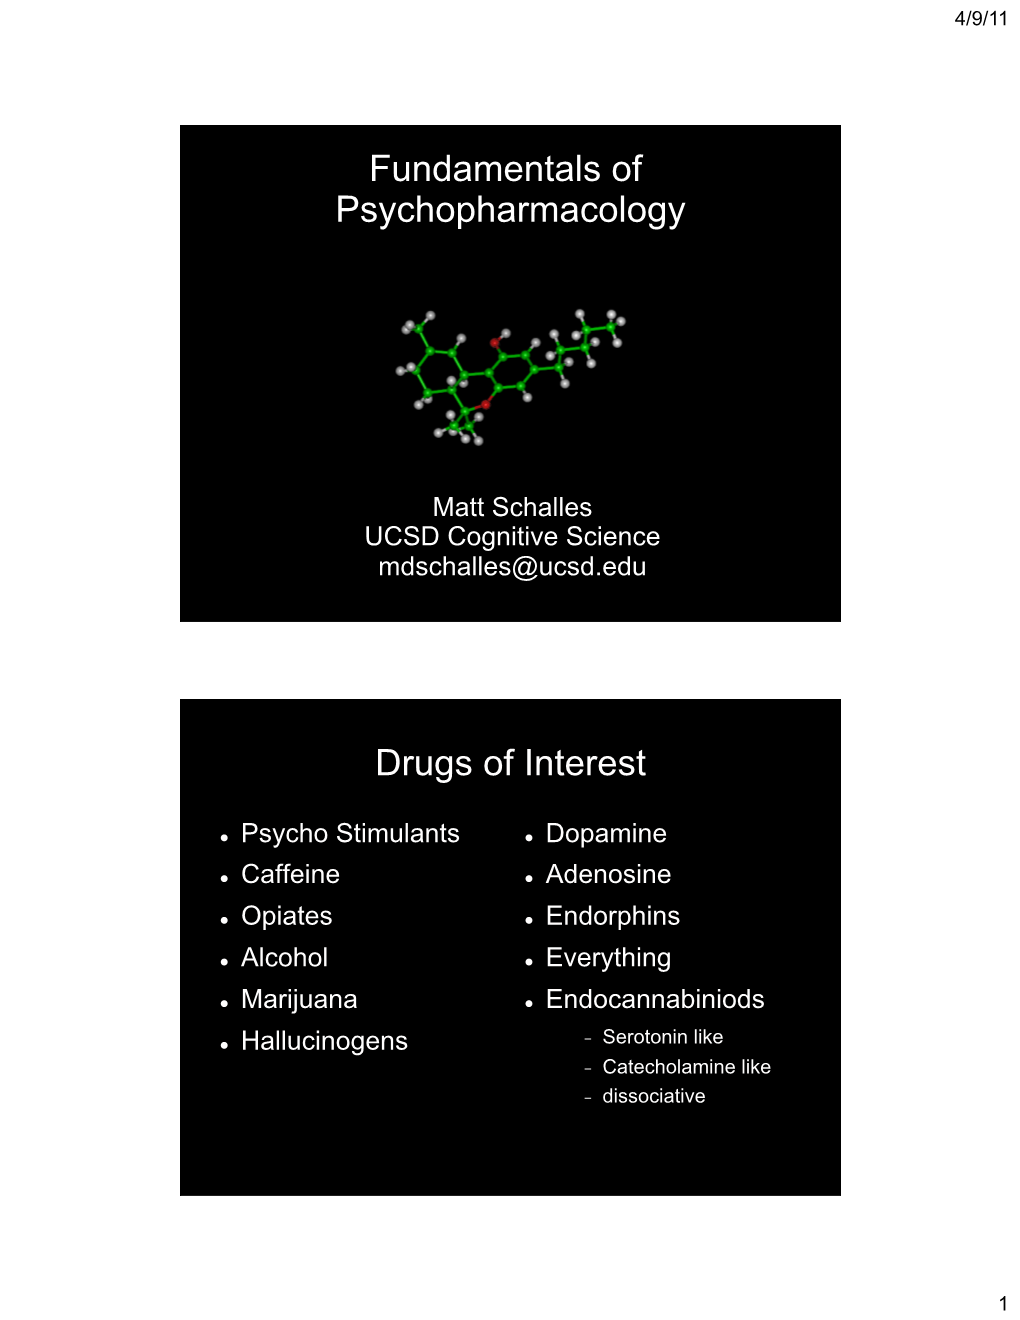 Fundamentals of Psychopharmacology Drugs Of